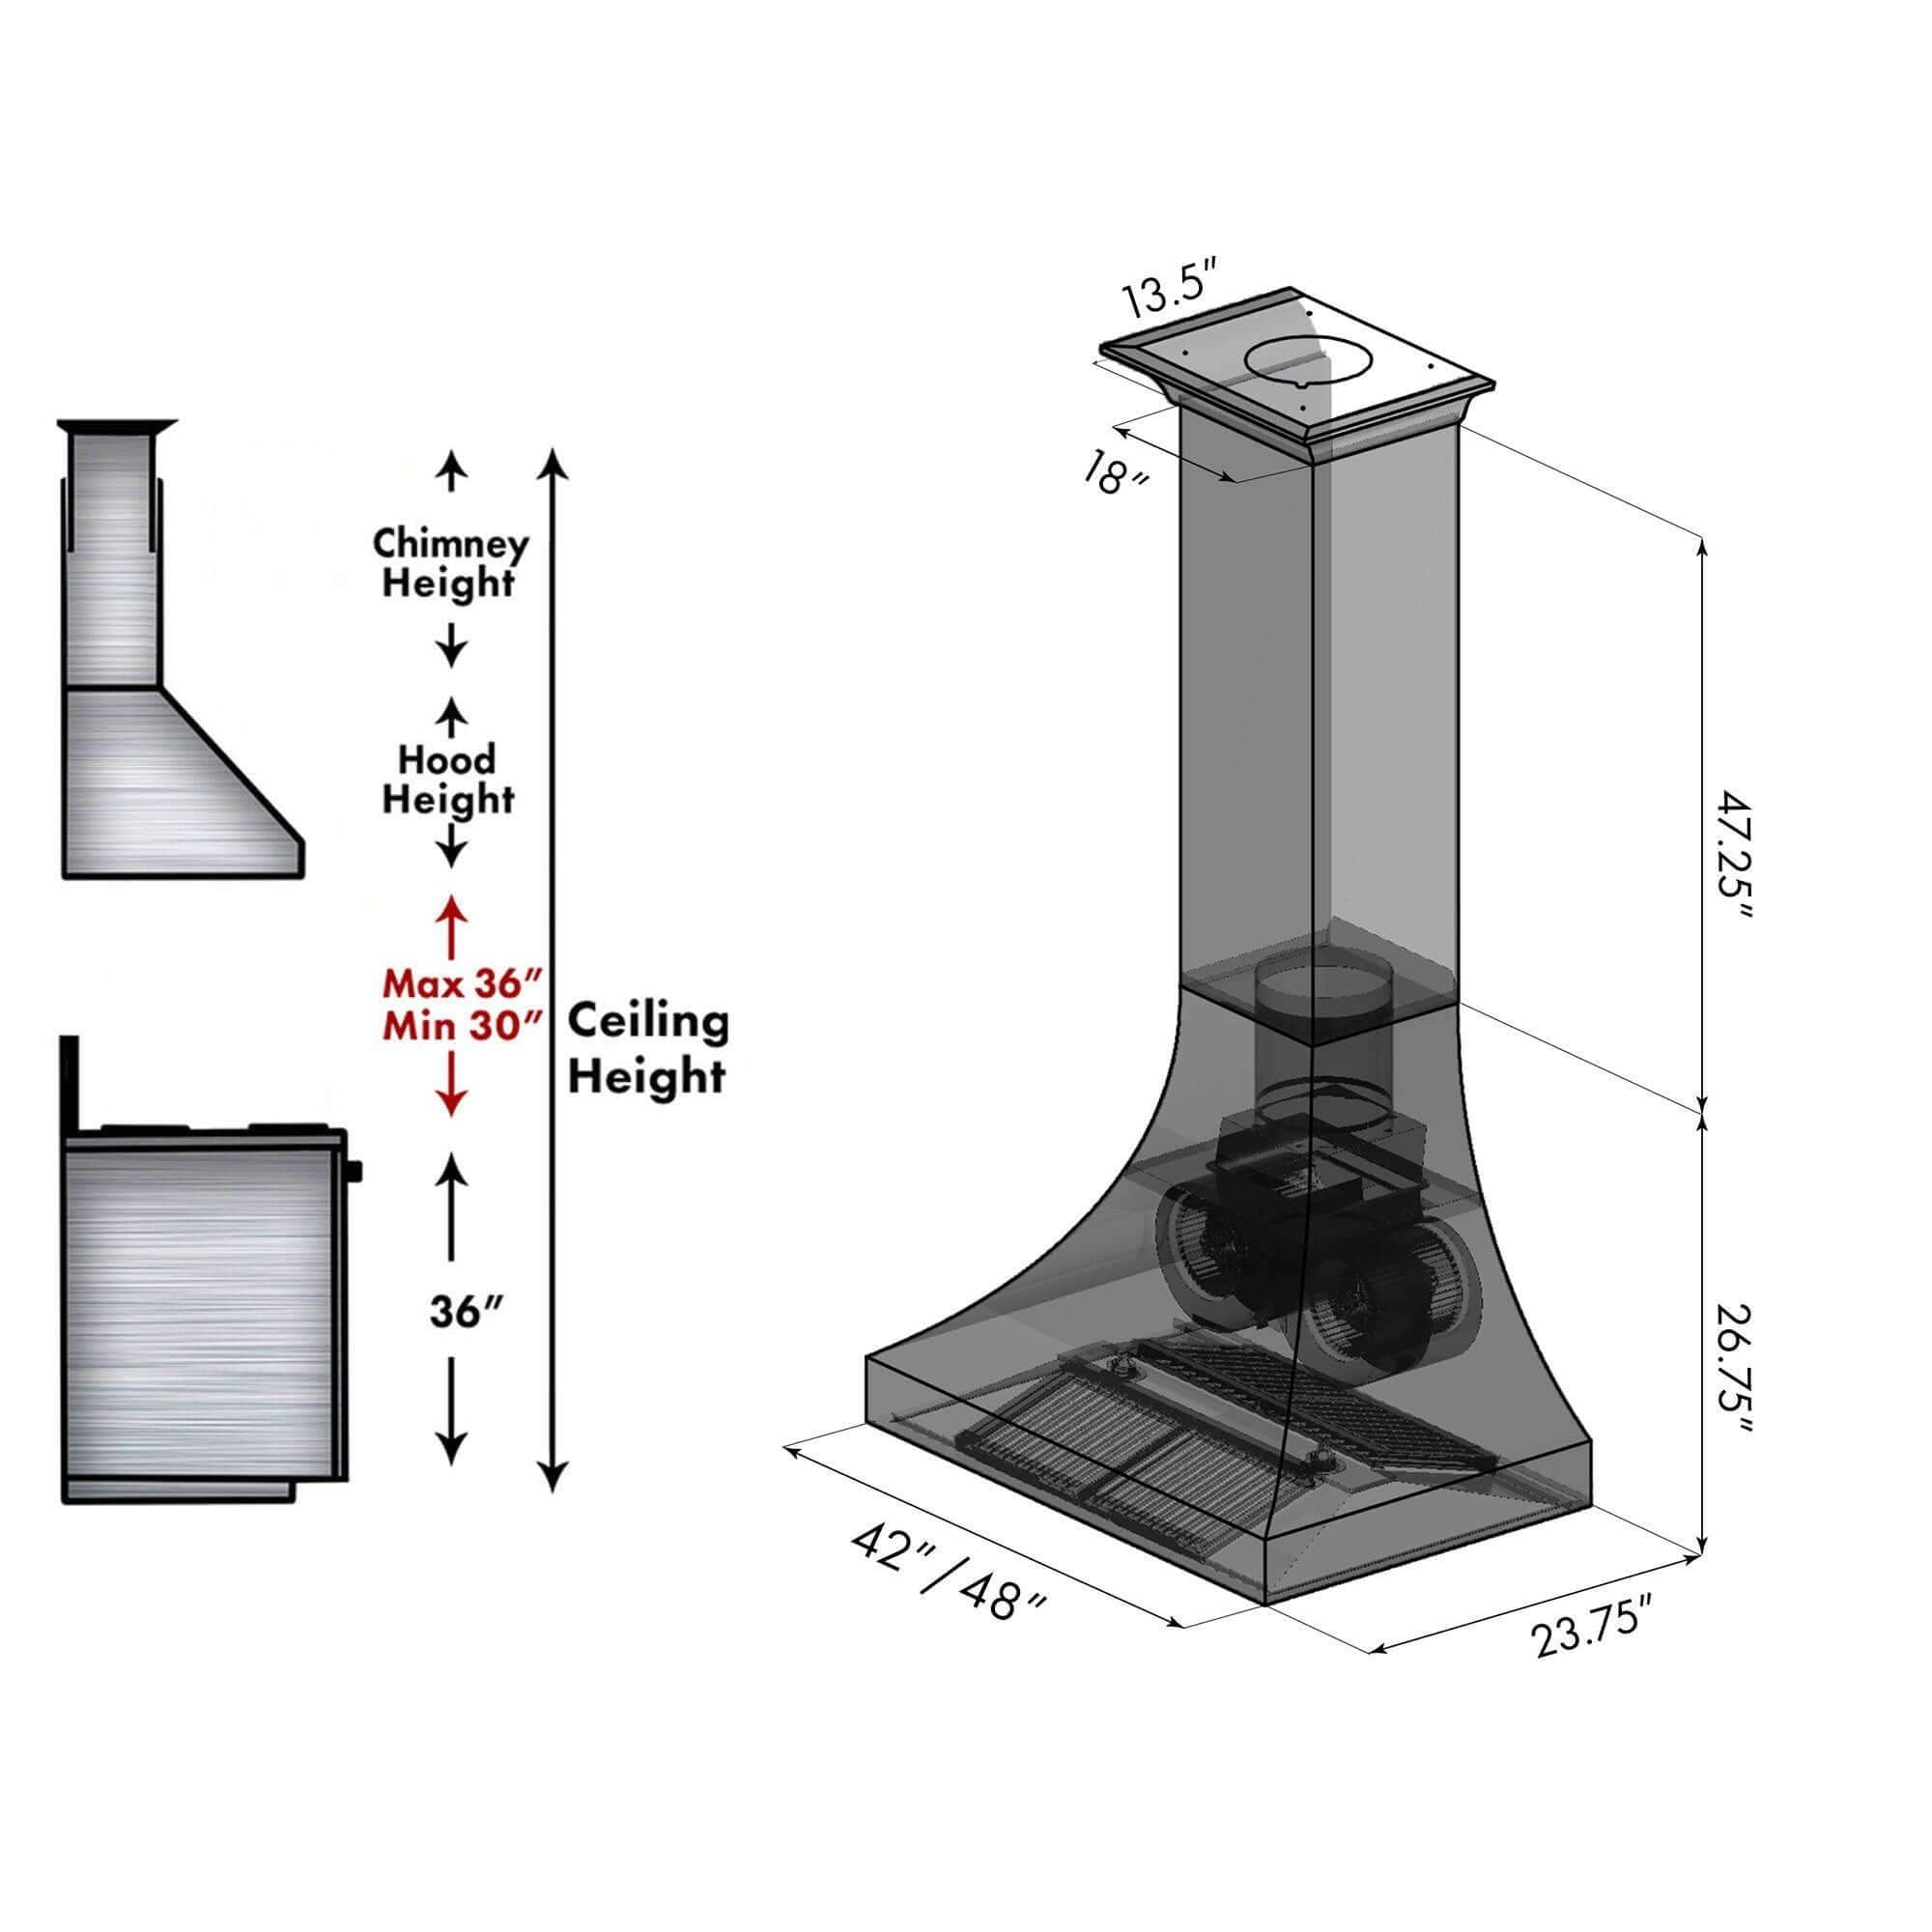 ZLINE Designer Series Oil-Rubbed Bronze Wall Range Hood (8632B) chimney height guide and dimensional measurements.